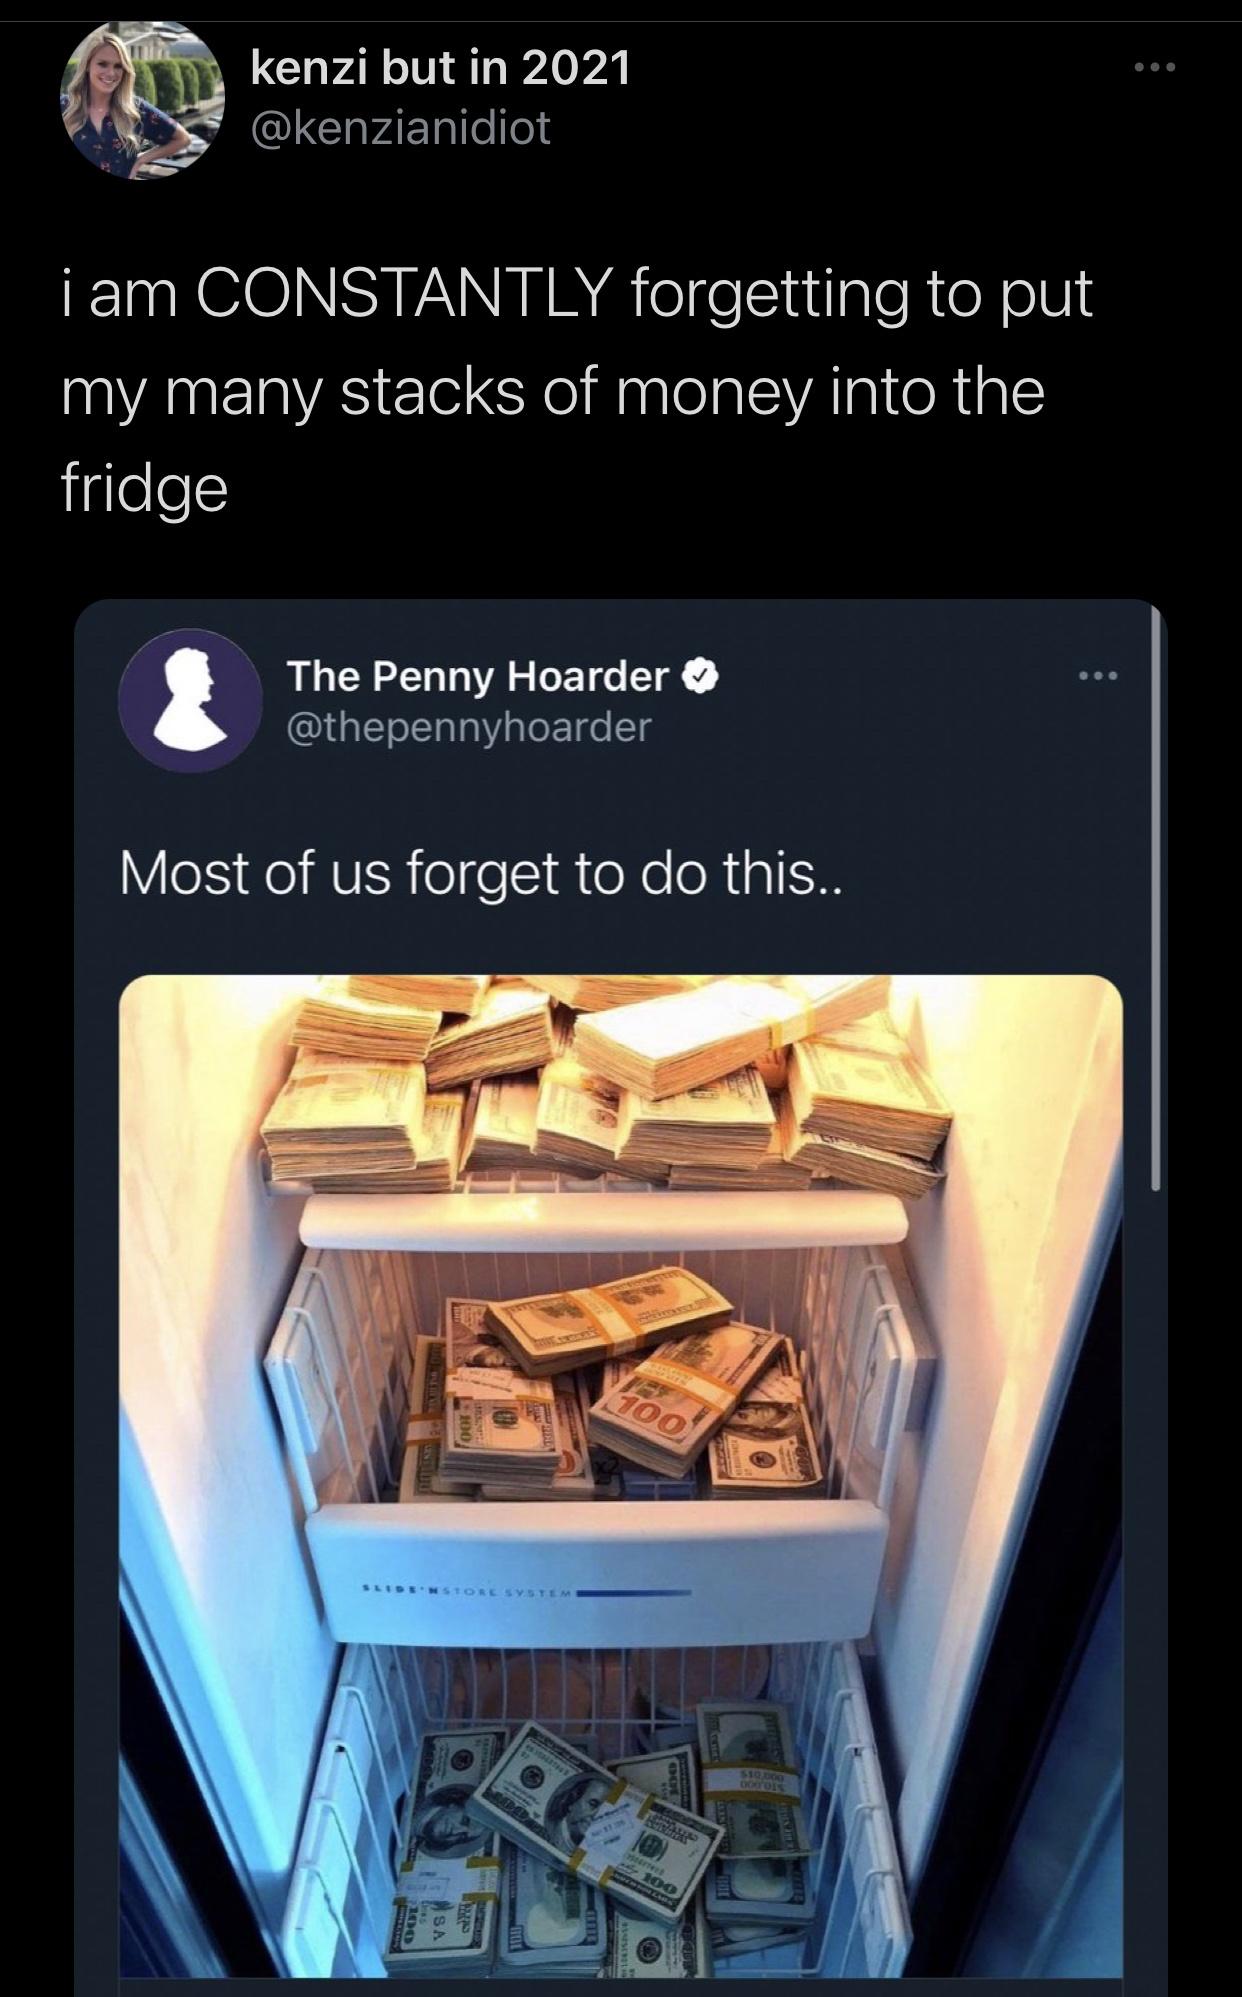 screenshot - kenzi but in 2021 i am Constantly forgetting to put my many stacks of money into the fridge The Penny Hoarder Most of us forget to do this.. Eur 100 Sliden Store System 100 Sa